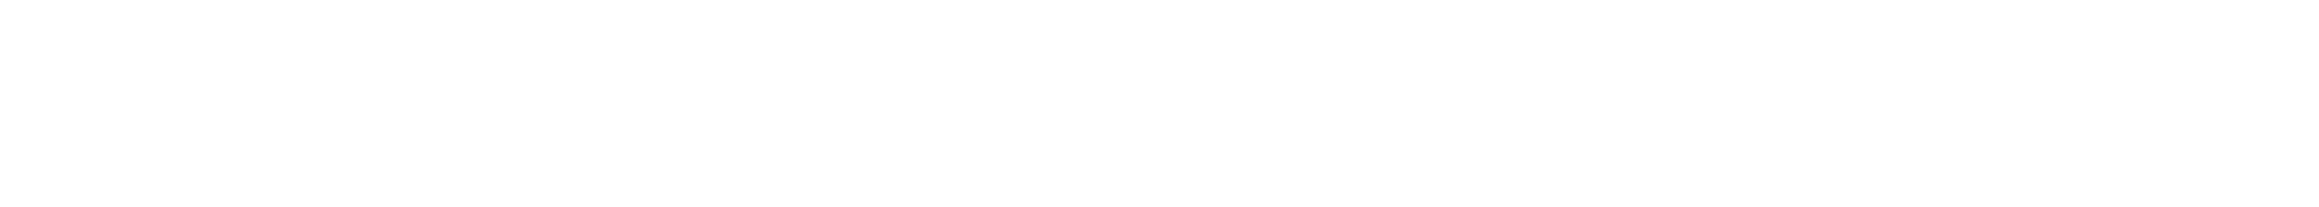 Department of Infrastructure, Transport, Regional Development, Communications and the Arts print logo